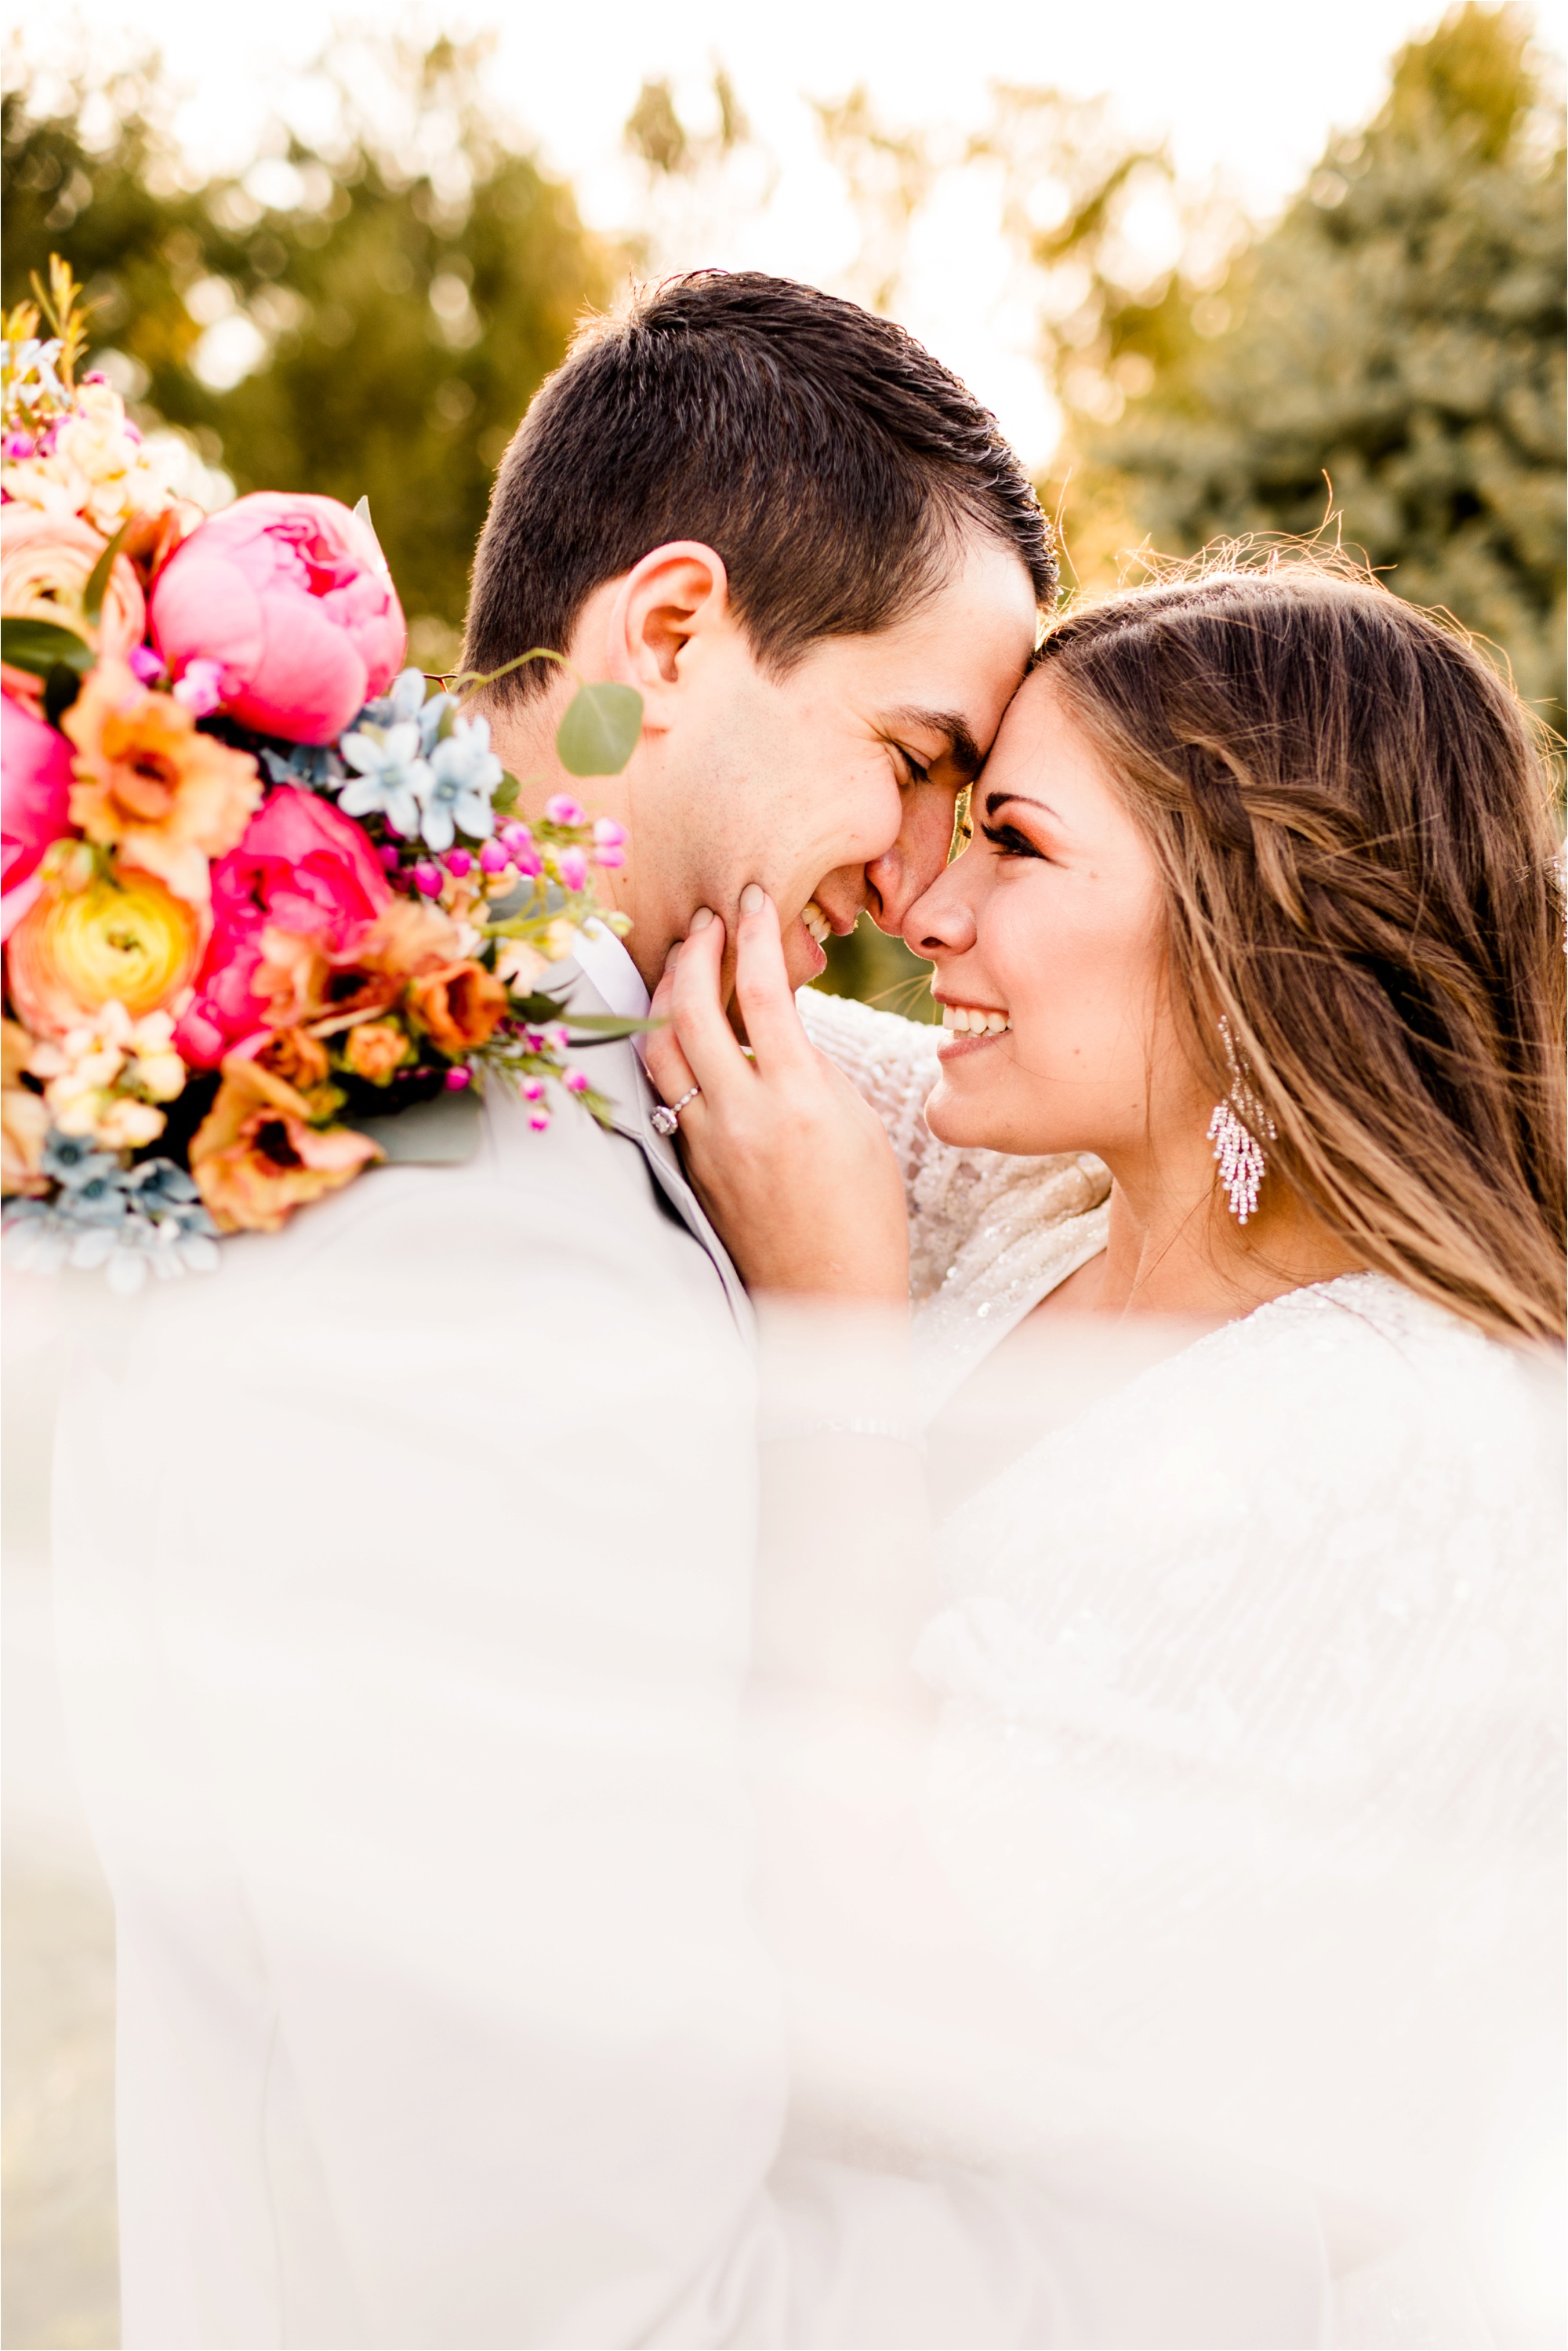 Caitlin and Luke Photography, Illinois Wedding Photographers, Champaign Wedding Photographers, Bloomington Normal Wedding Photographers, Romantic Red and Pink Sunset Styled Shoot_9570.jpg